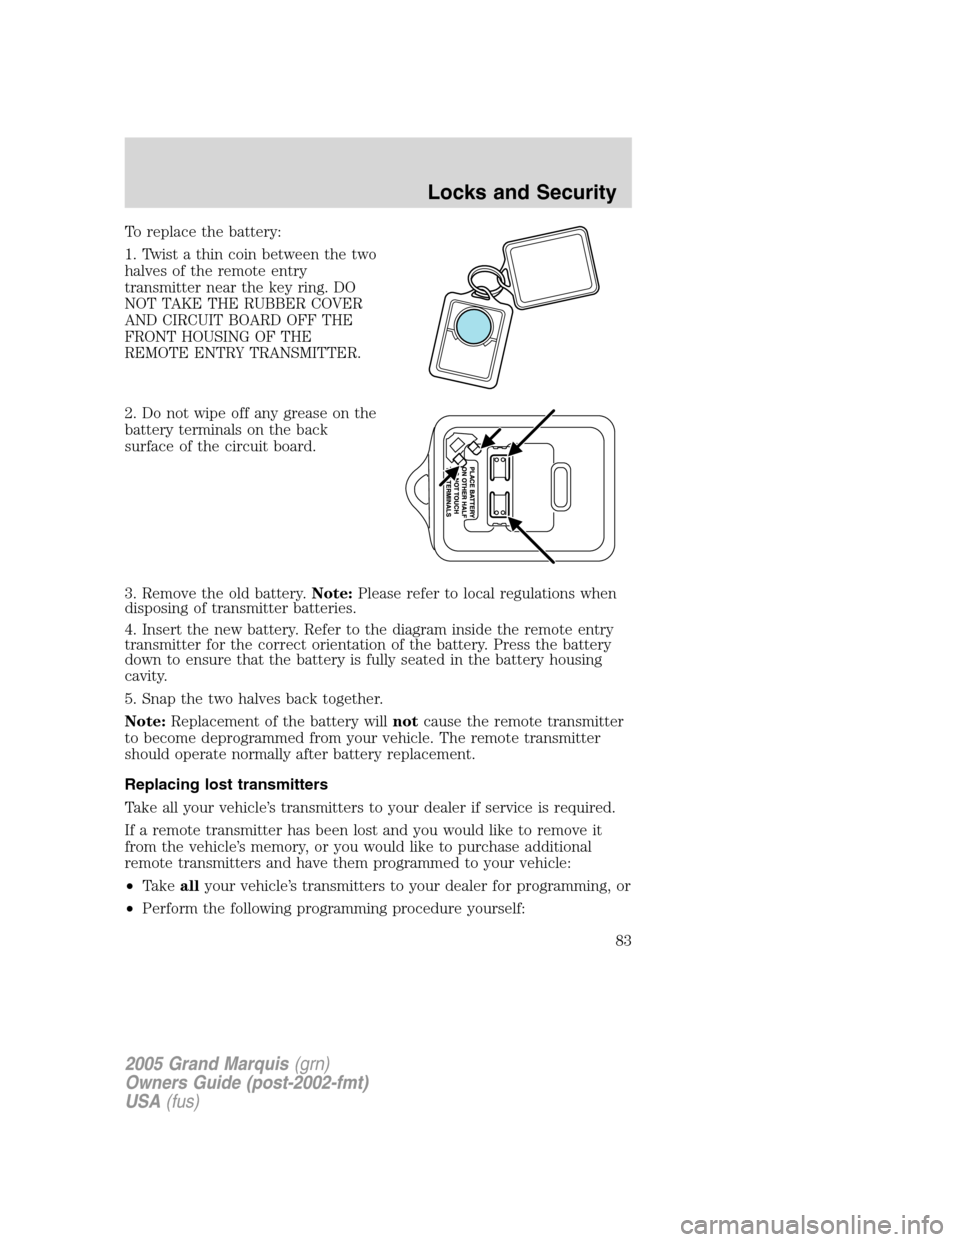 Mercury Grand Marquis 2005  s Manual Online To replace the battery:
1. Twist a thin coin between the two
halves of the remote entry
transmitter near the key ring. DO
NOT TAKE THE RUBBER COVER
AND CIRCUIT BOARD OFF THE
FRONT HOUSING OF THE
REMOT